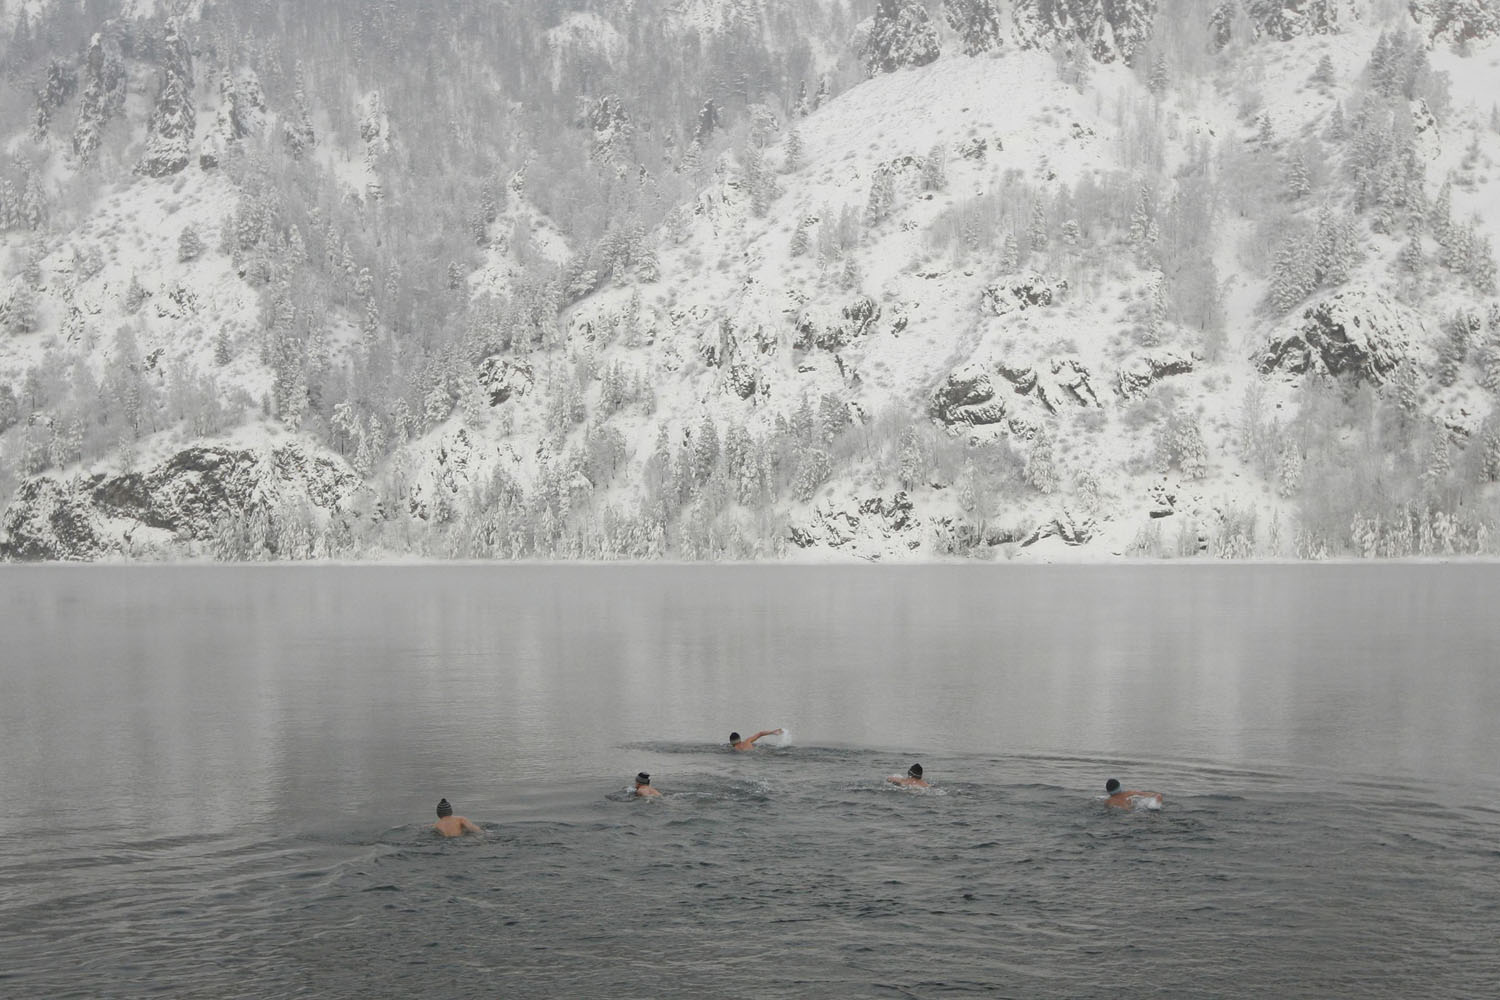 Members of a local winter swimming club take part in their weekly bath in the Yenisei River, while air temperatures stand at minus 17 degrees Celsius, in town of Divnogorsk